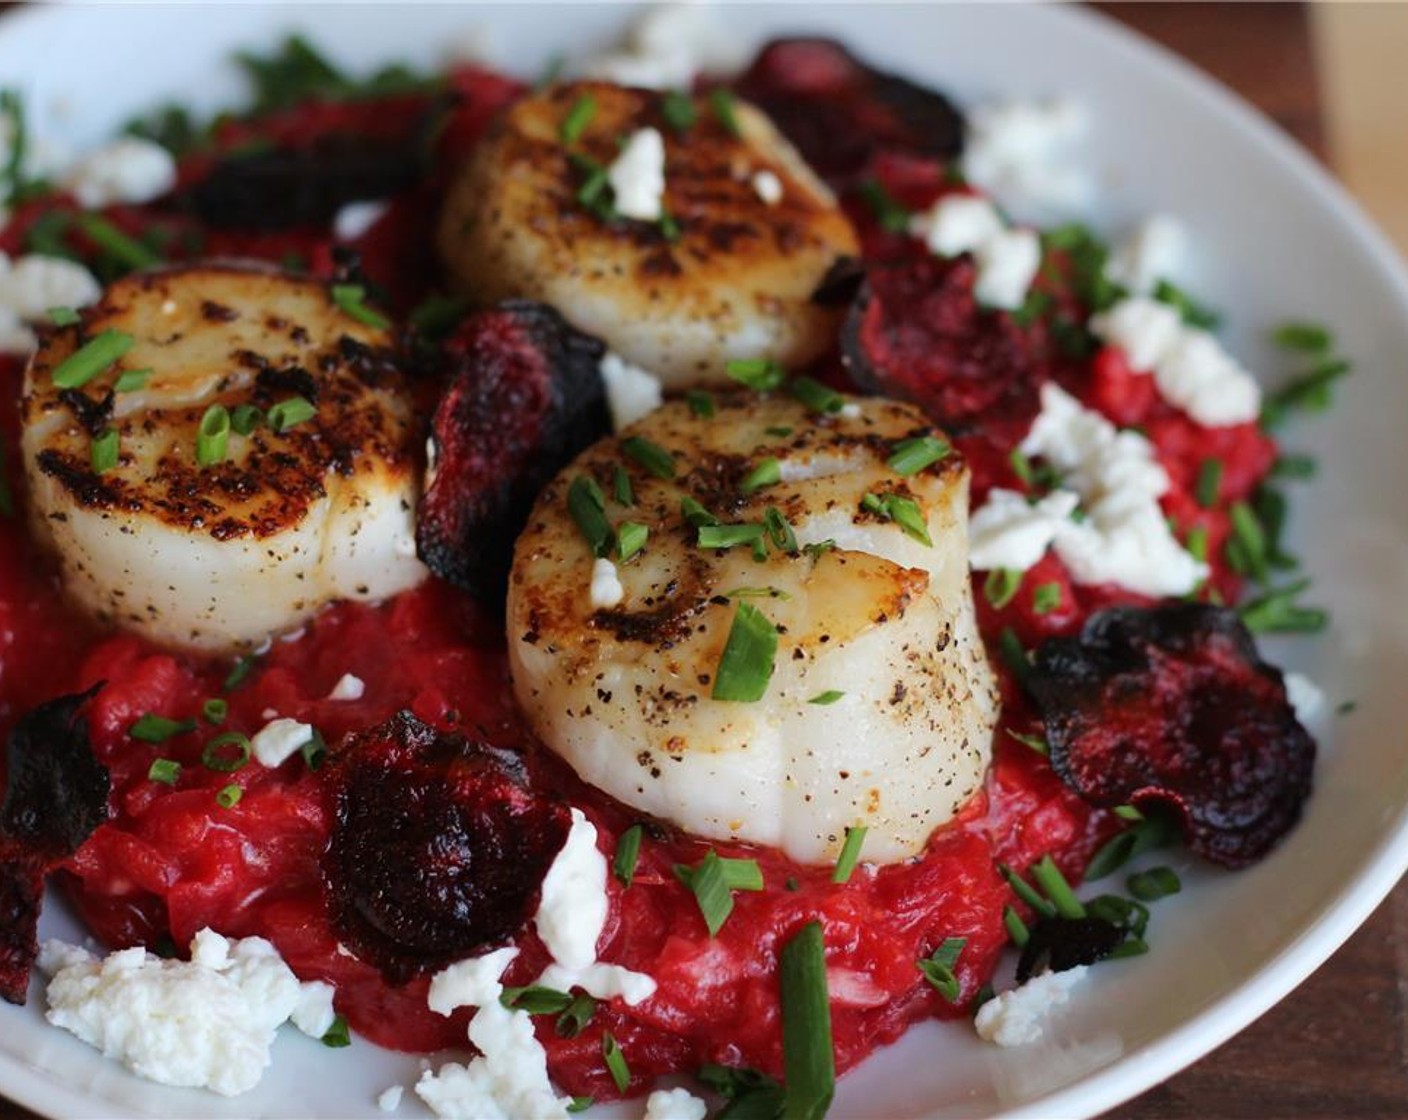 step 17 To plate the dish, spread a cup of risotto on a plate, and top with 3 scallops. Garnish with fresh Goat Cheese (1/2 cup), Fresh Chives (to taste) and beets chips.